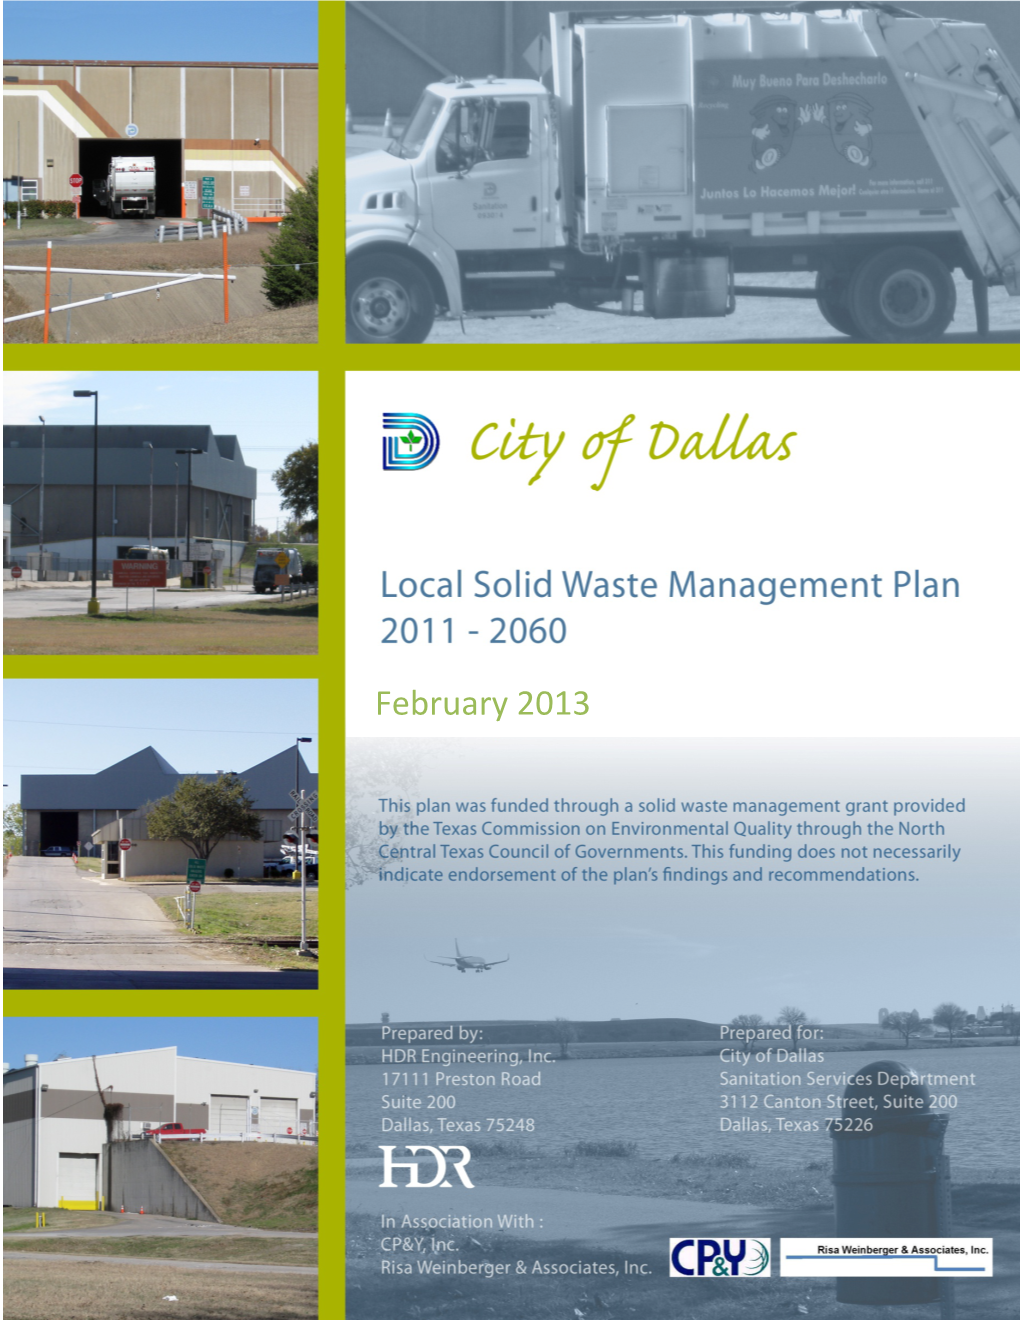 2011-2060 Local Solid Waste Management Plan